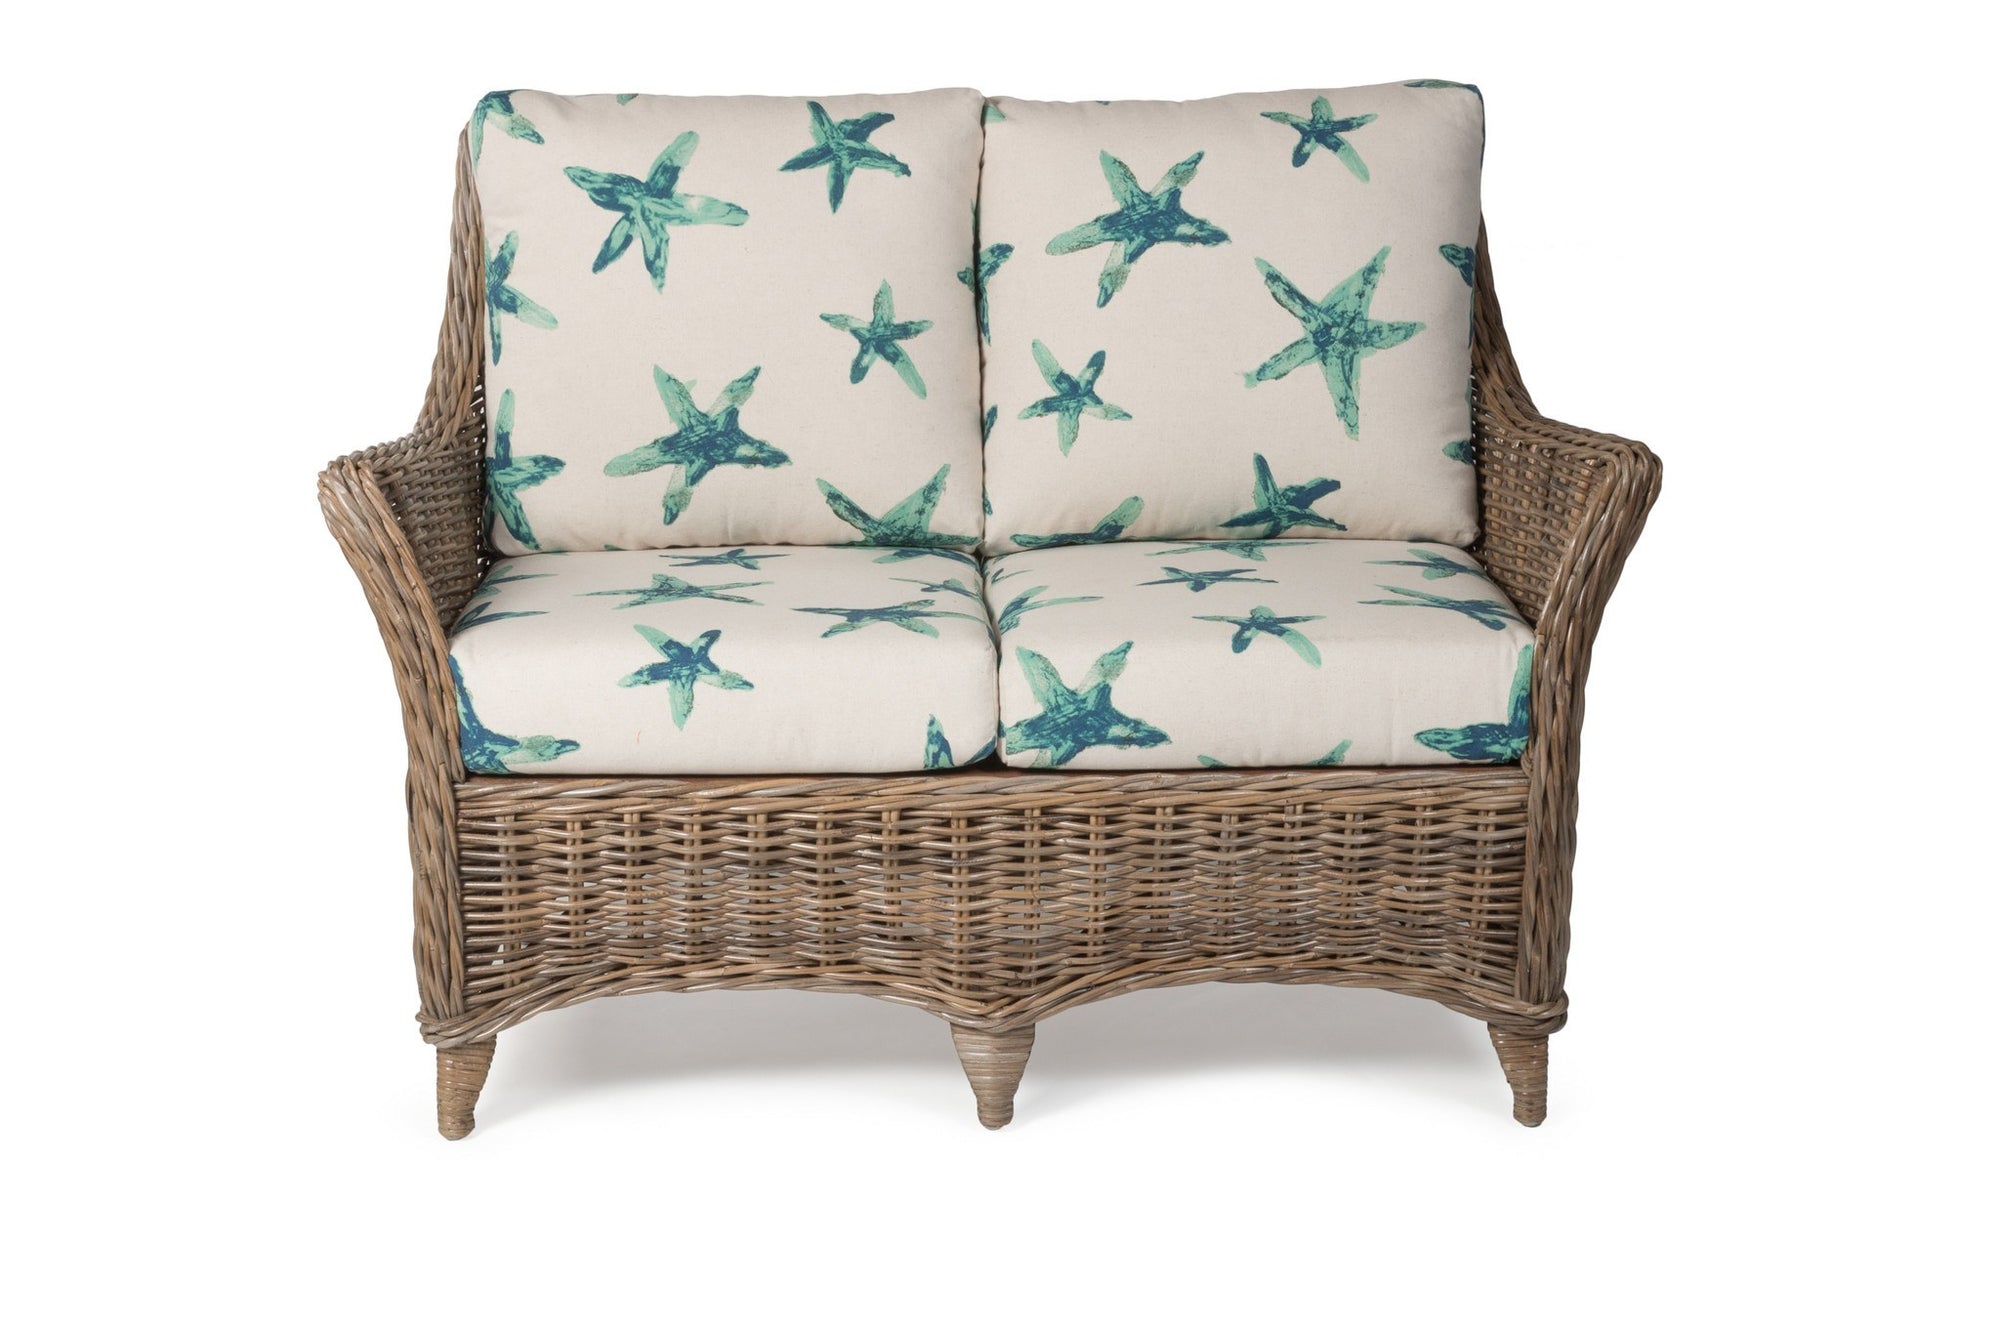 Designer Wicker & Rattan By Tribor Conservatory Loveseat by Designer Wicker from Tribor Loveseat - Rattan Imports